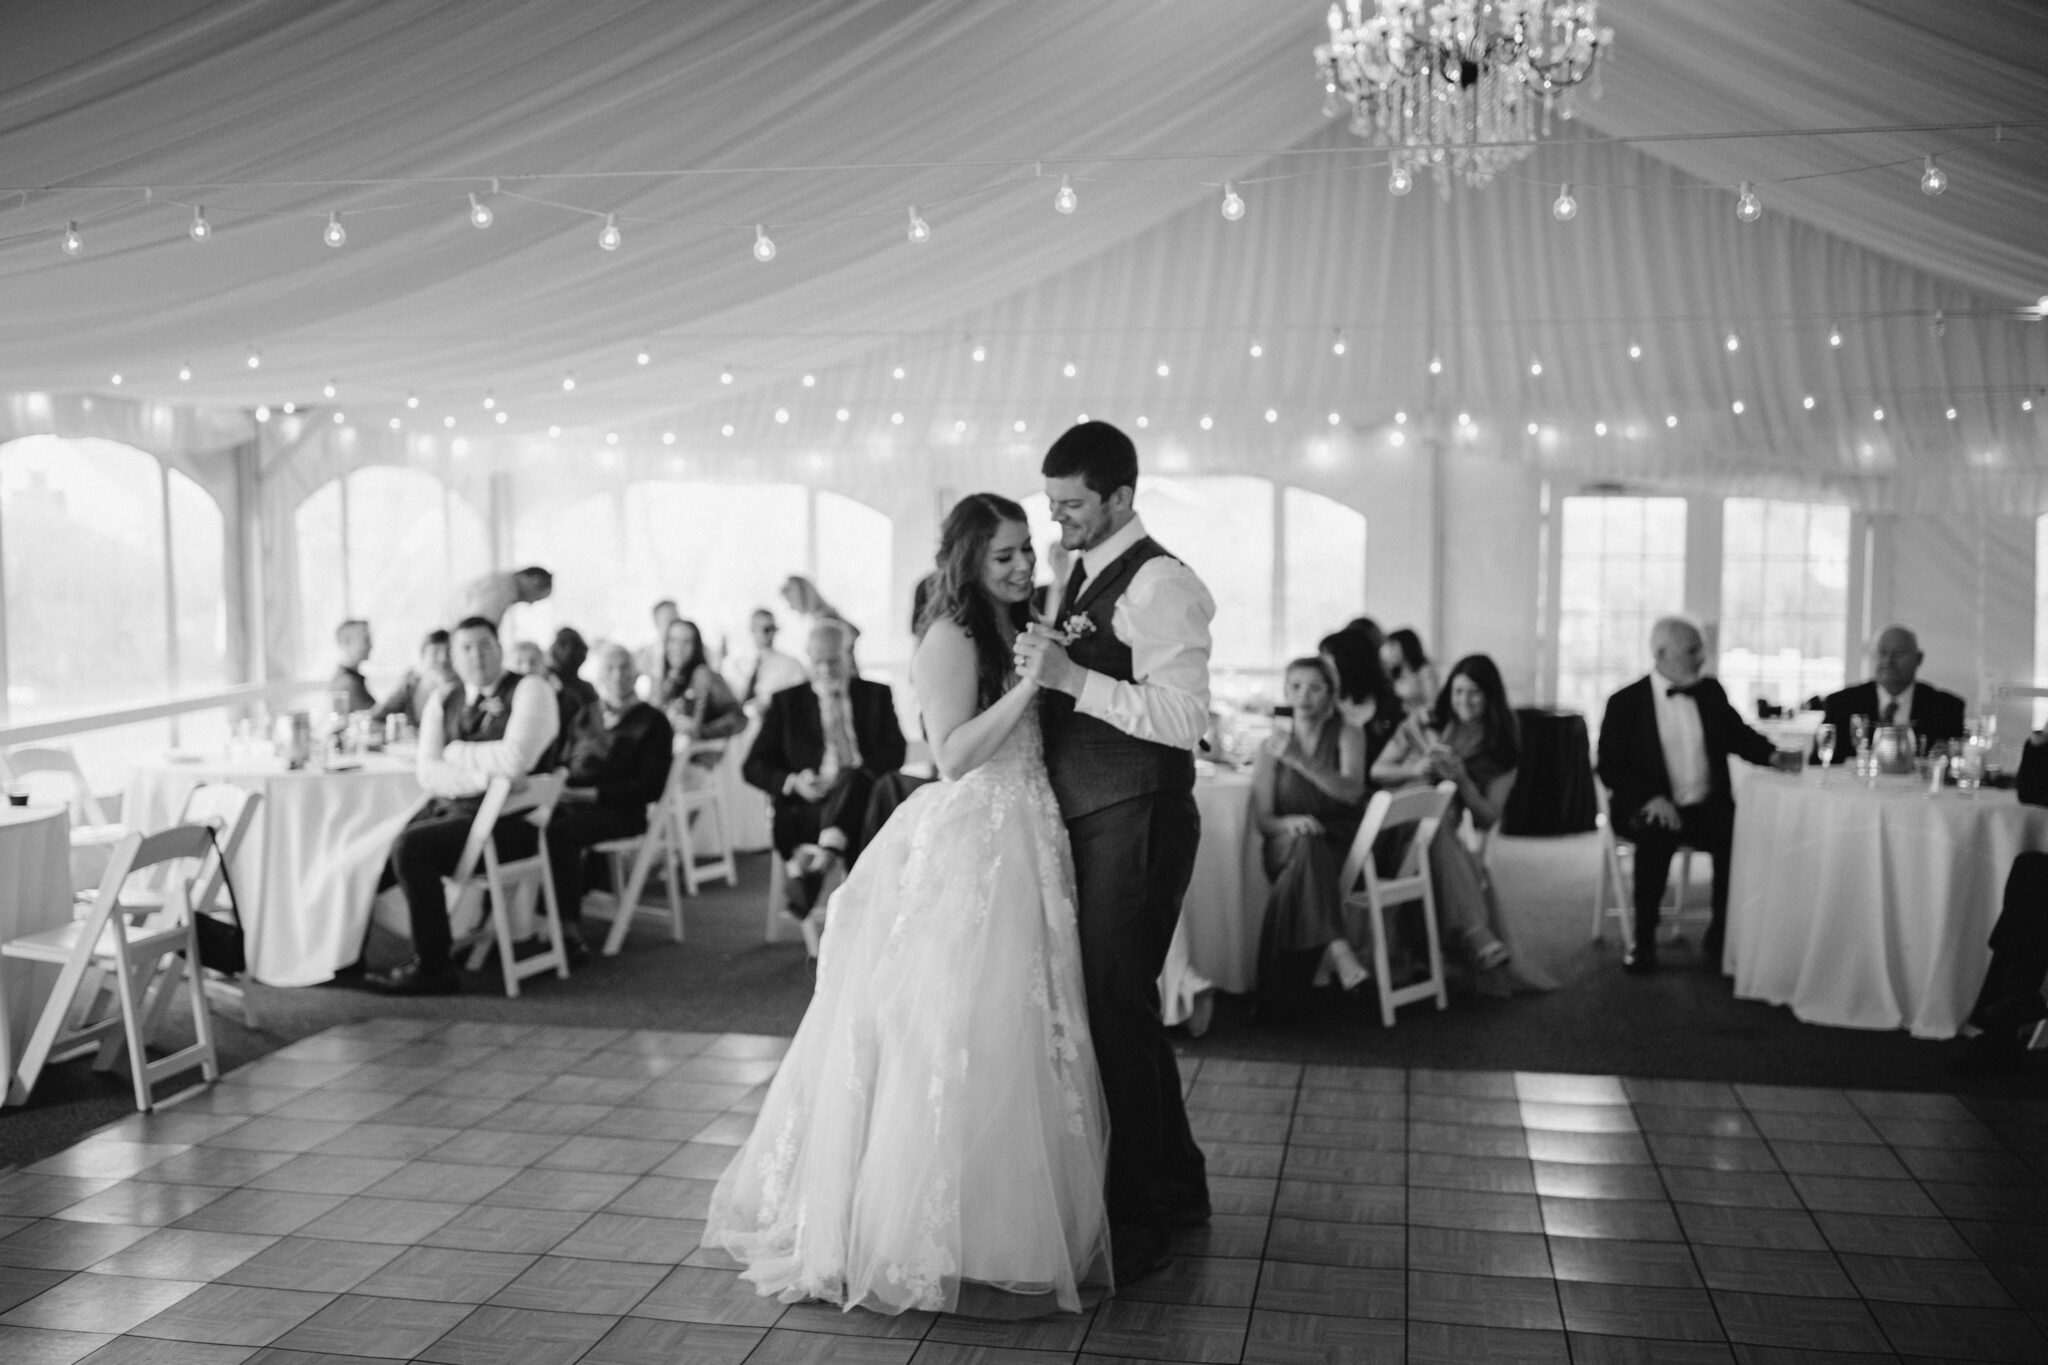 image shows a black and white photo of a bride and groom dancing